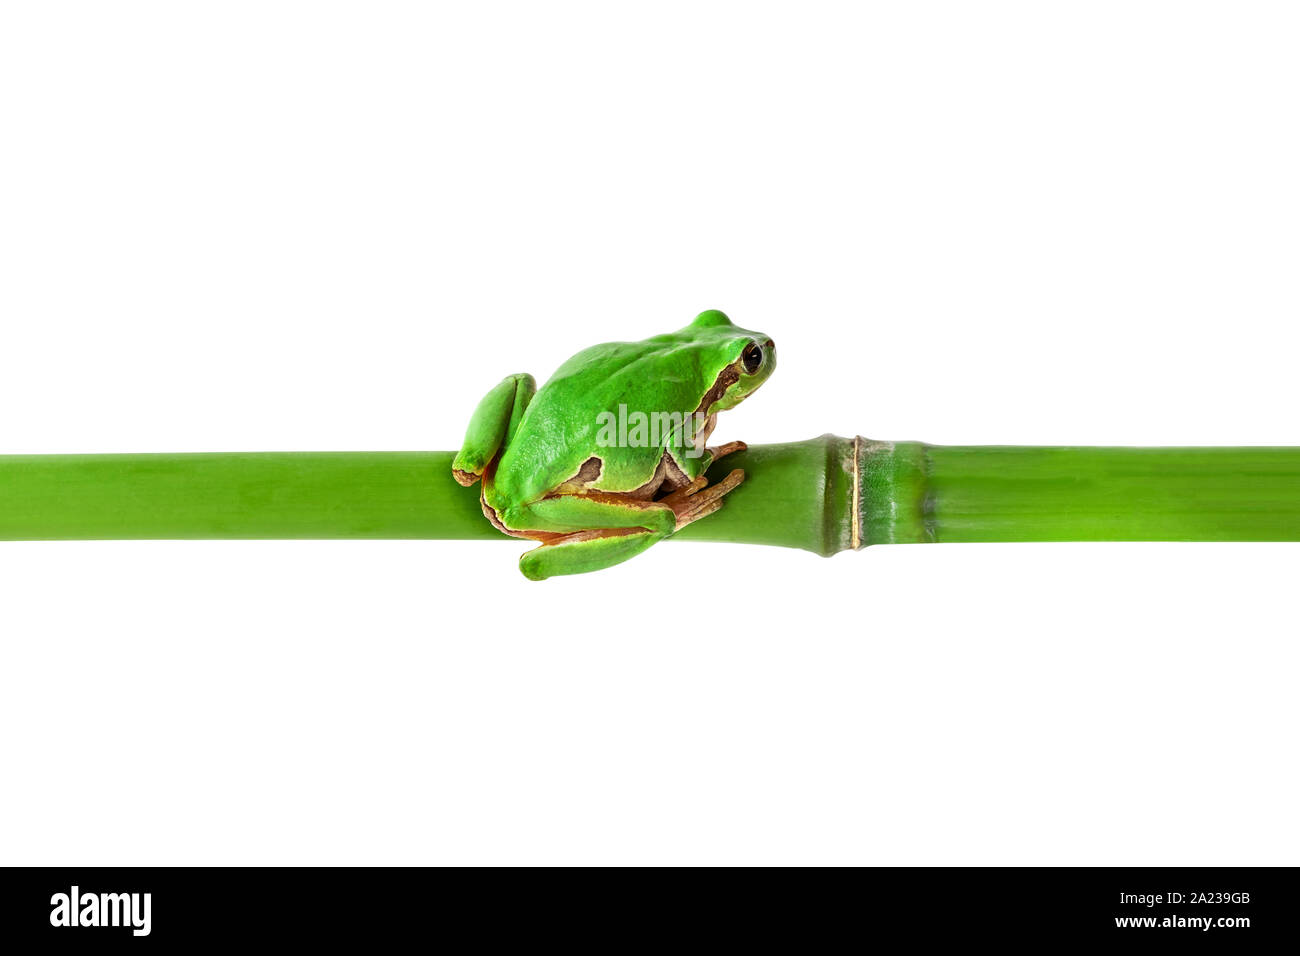 Green frog sitting on bamboo stick. Tree frog on bamboo isolated on white with clipping path. Horizontal position image. Stock Photo